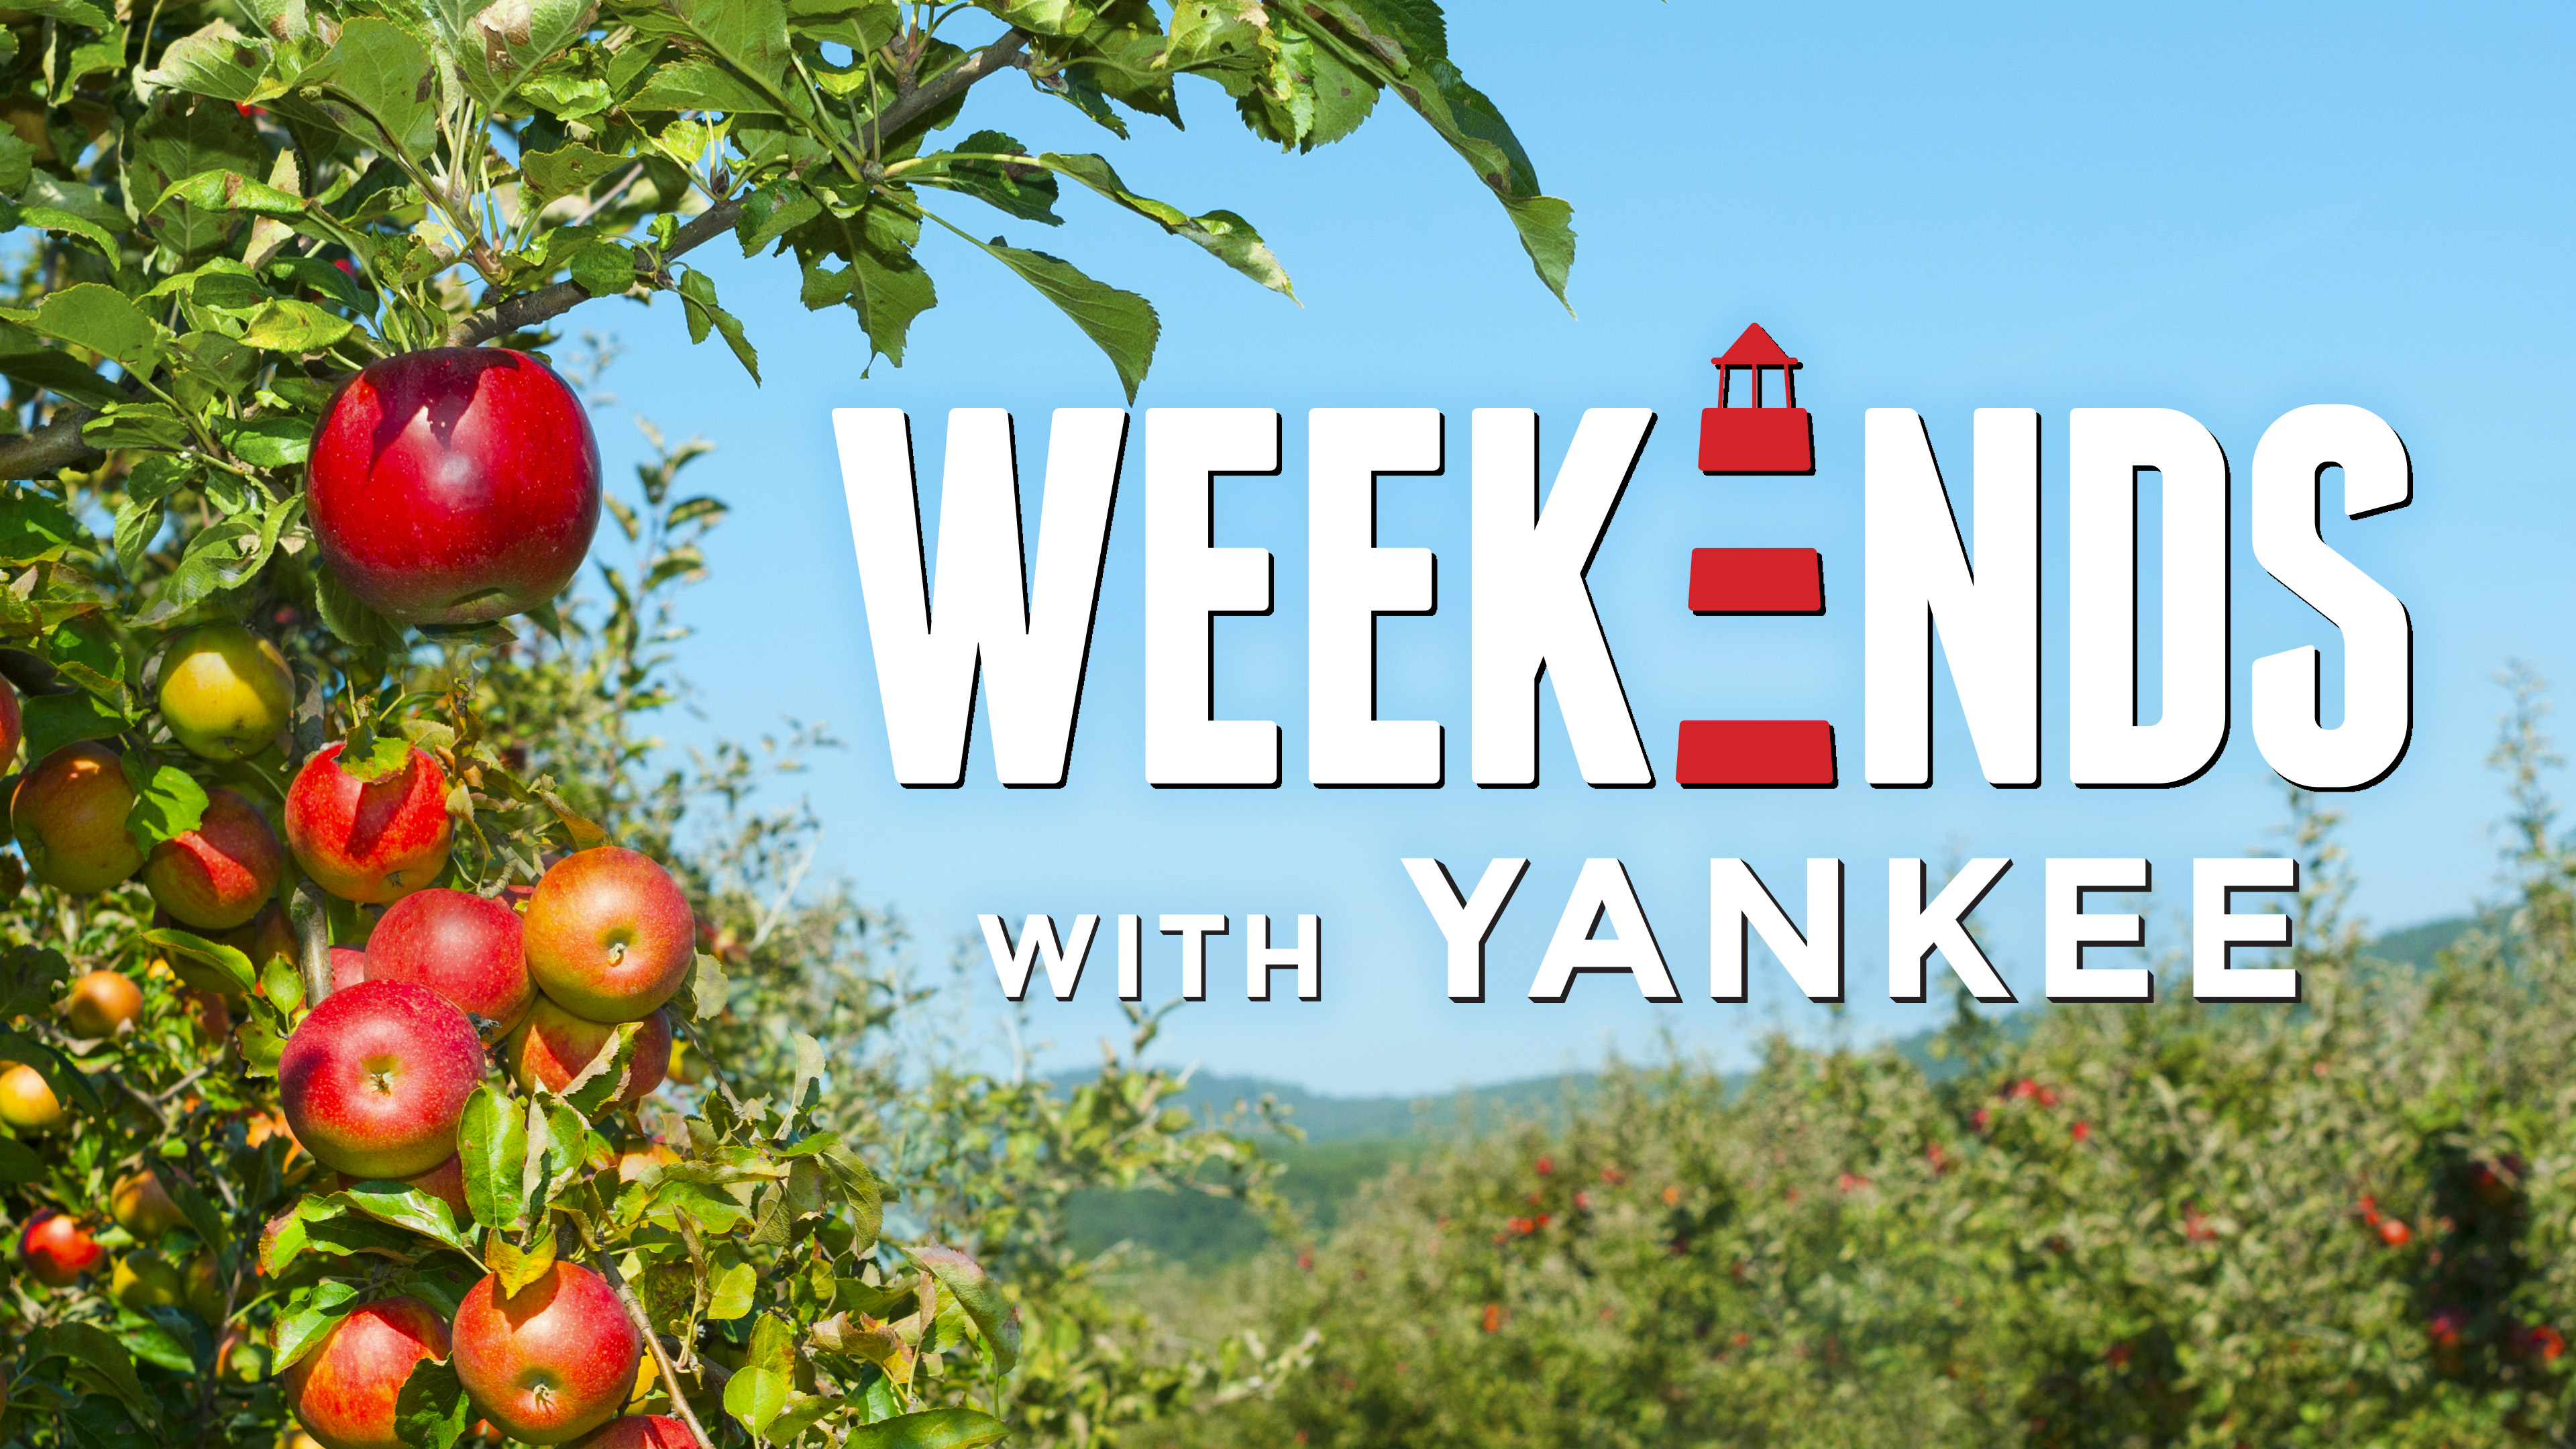 Check out Weekends With Yankee Season 8 airing on public television station near you!